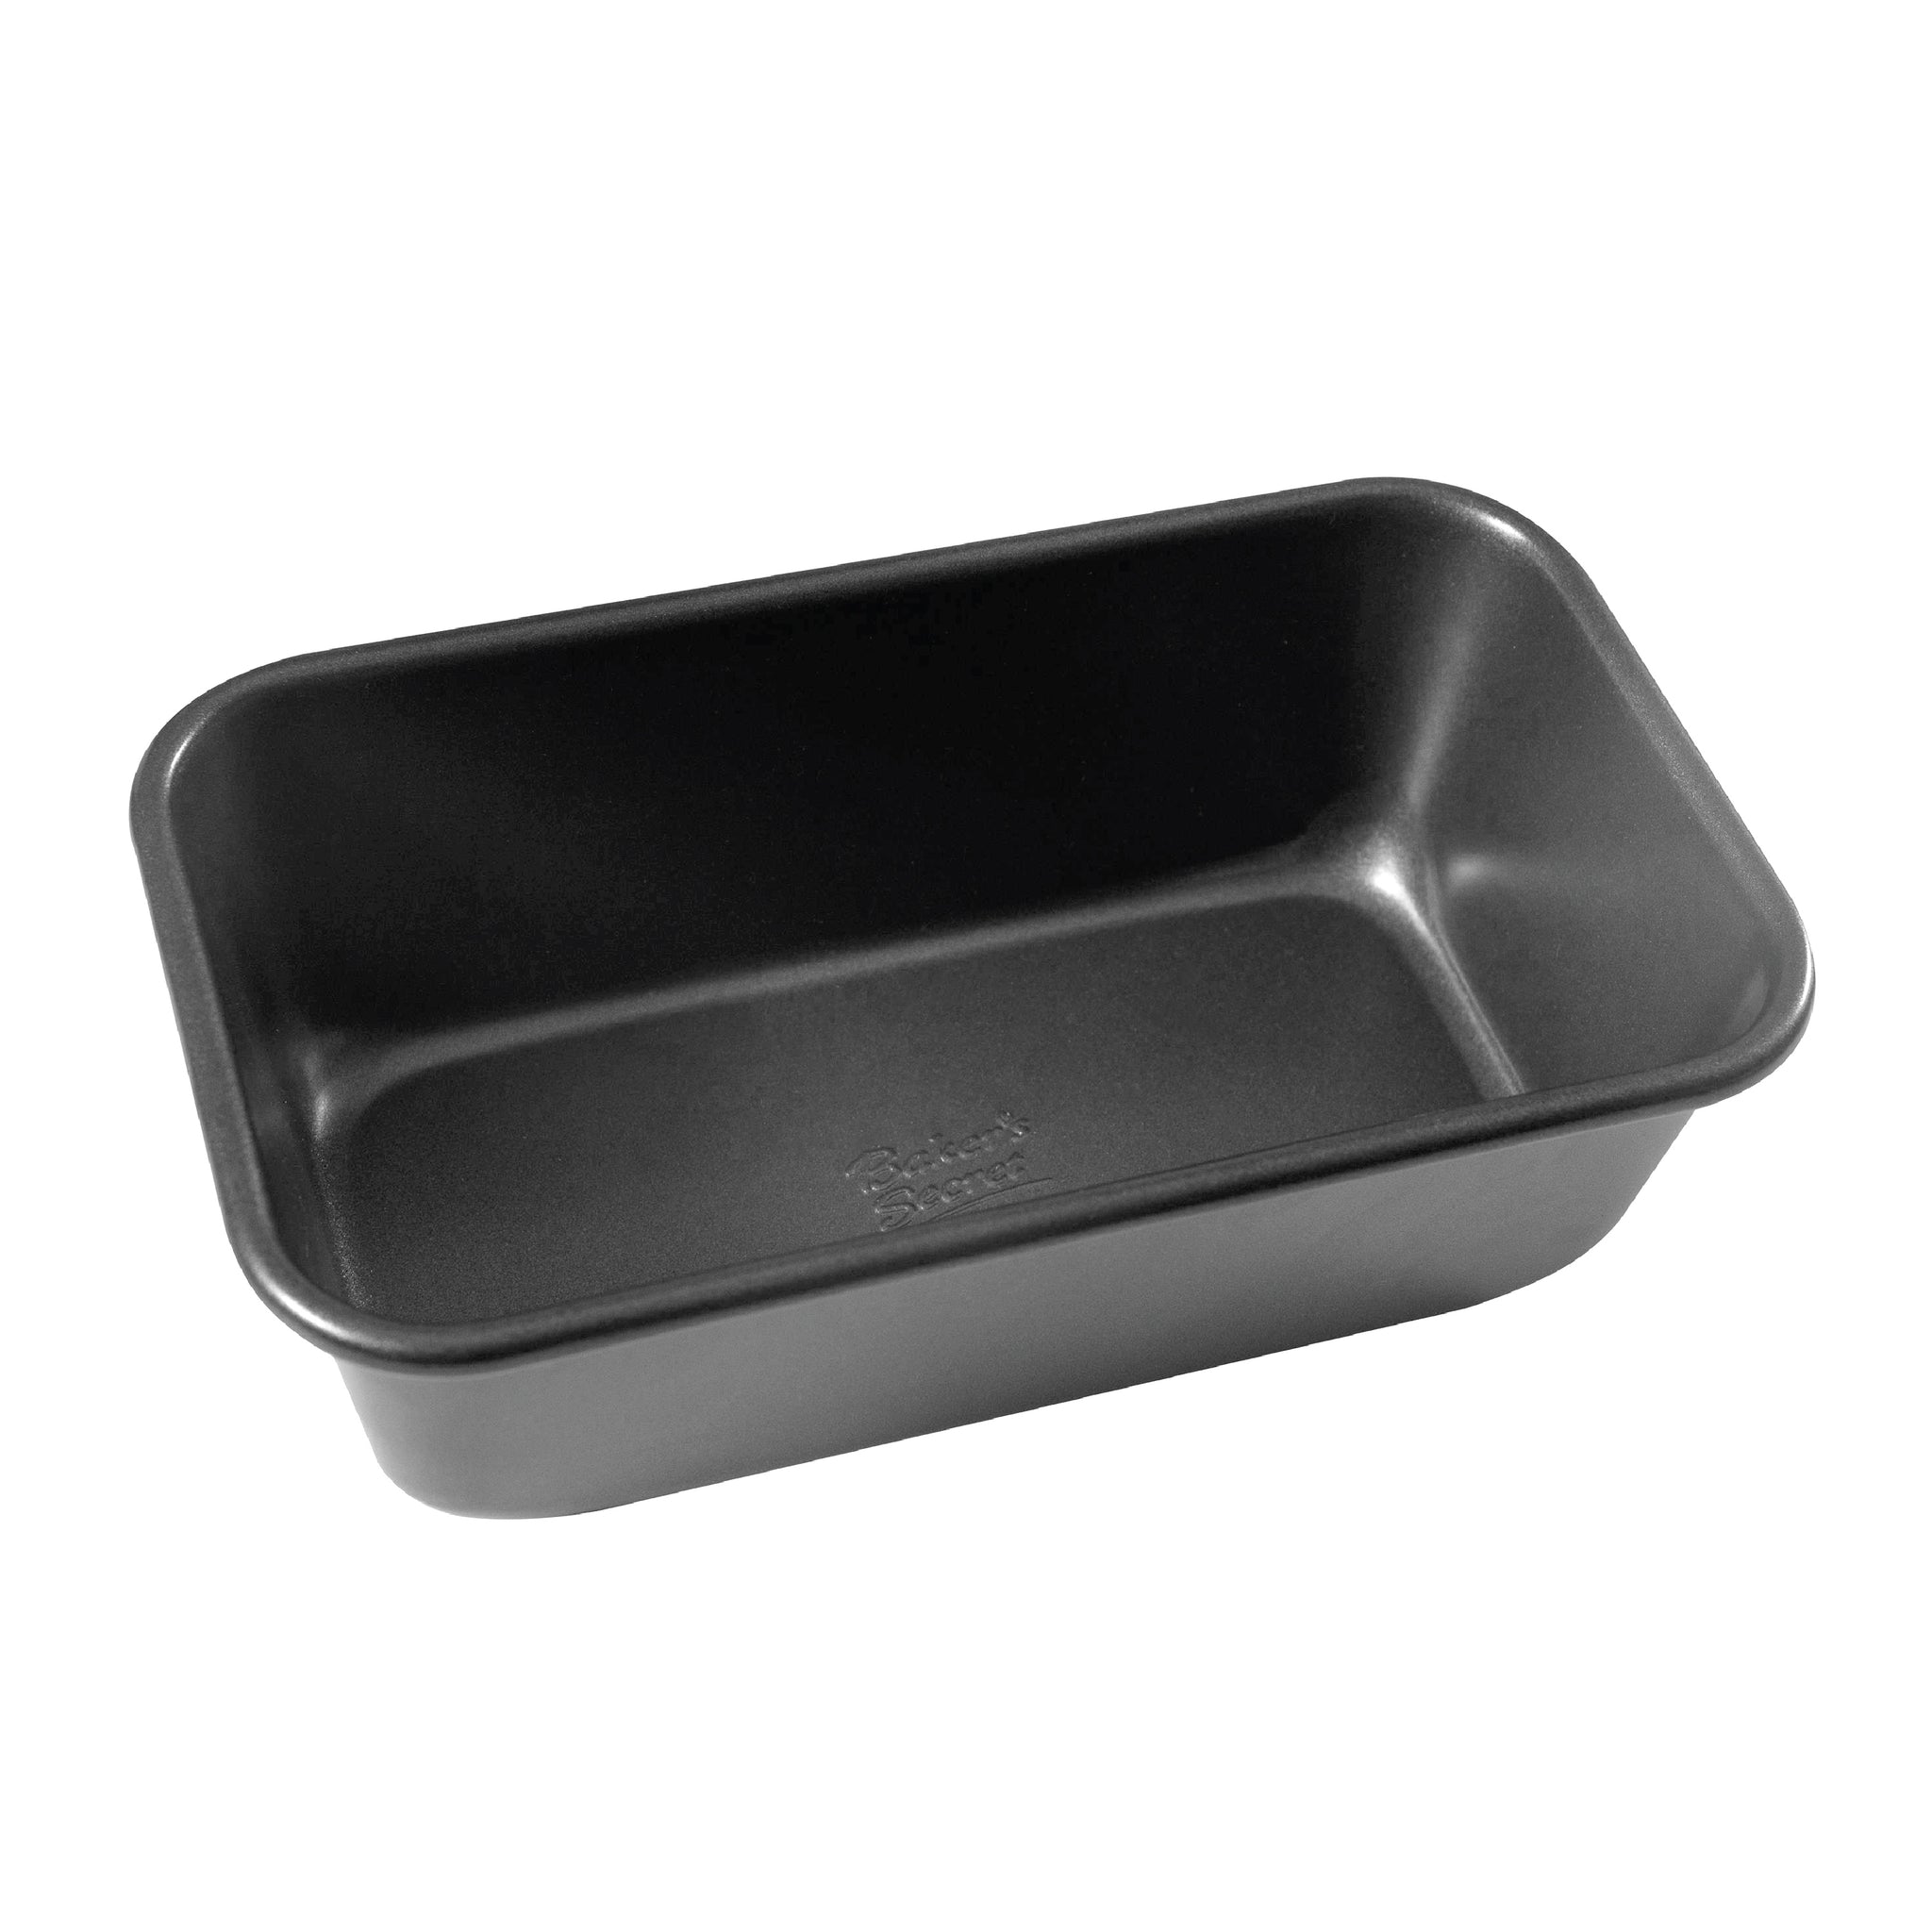 Baker's Secret Nonstick Loaf Pan for Baking Bread 9 x 5, 0.9mm Thick Carbon Steel Meatloaf Bread Pan 2 Layers Food-grade Coating, Non-Stick